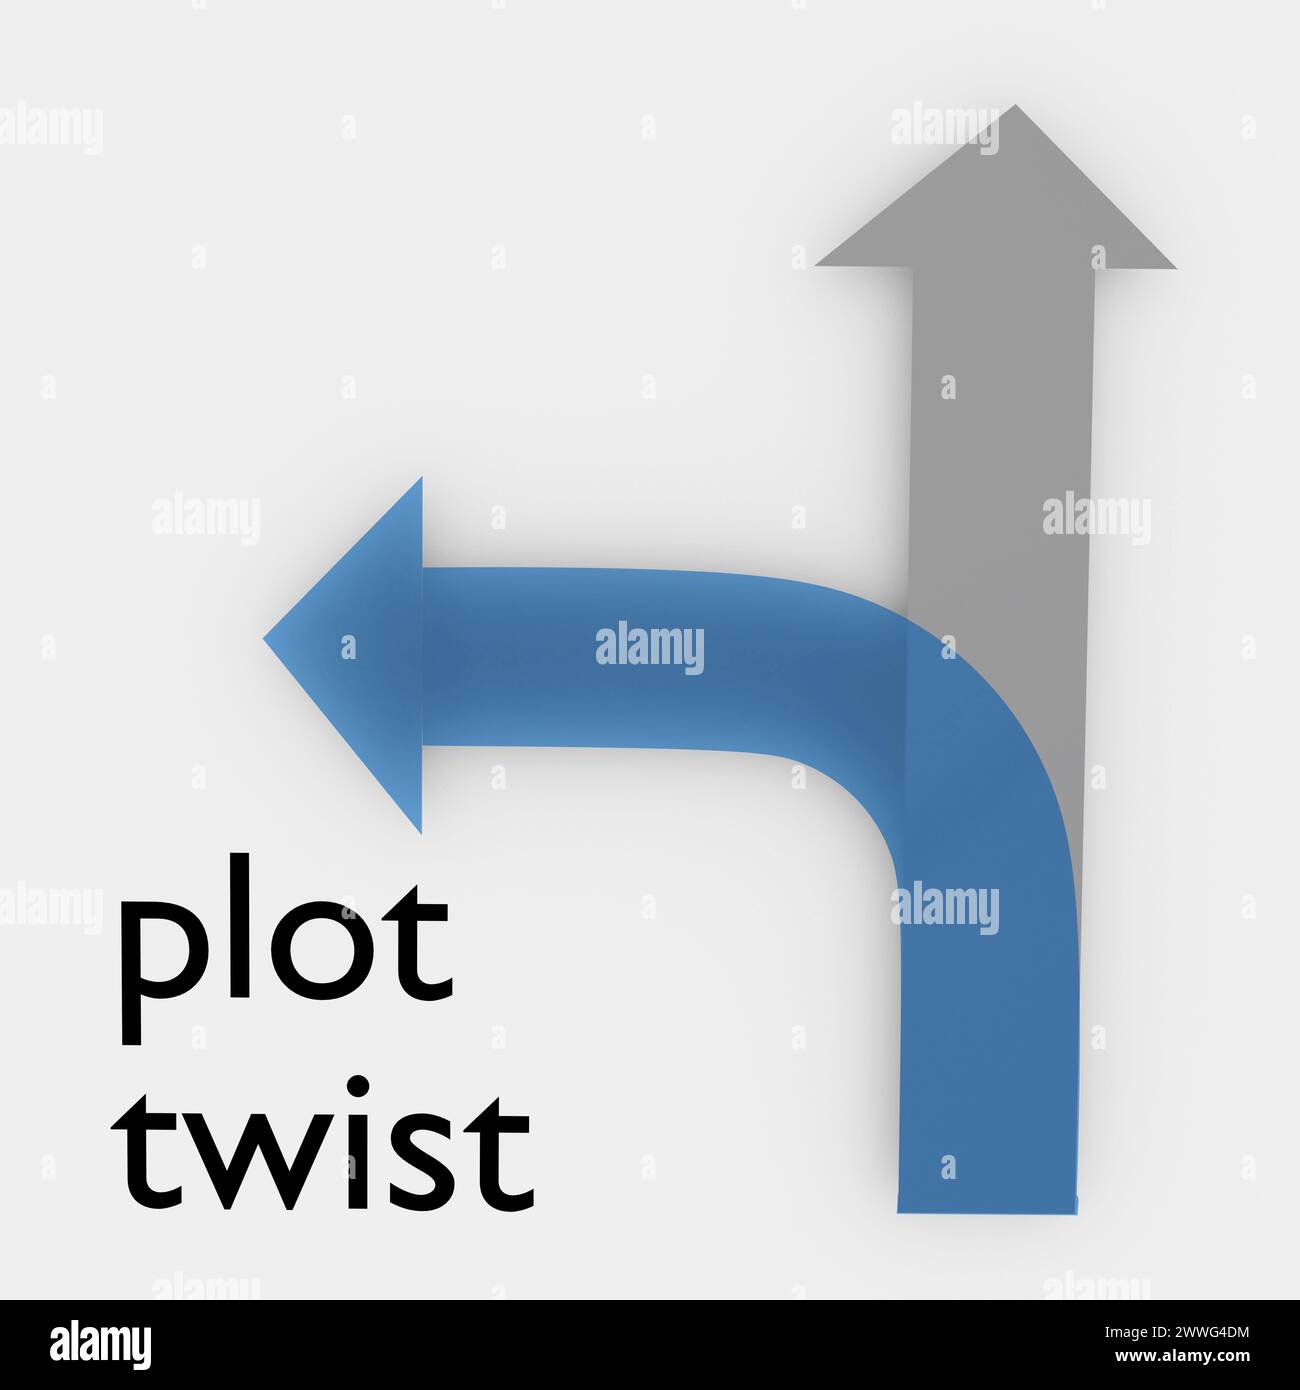 3D illustration of a gray straight arrow pointing upword and a blue curved arrow, titled as Plot Twist. Stock Photo